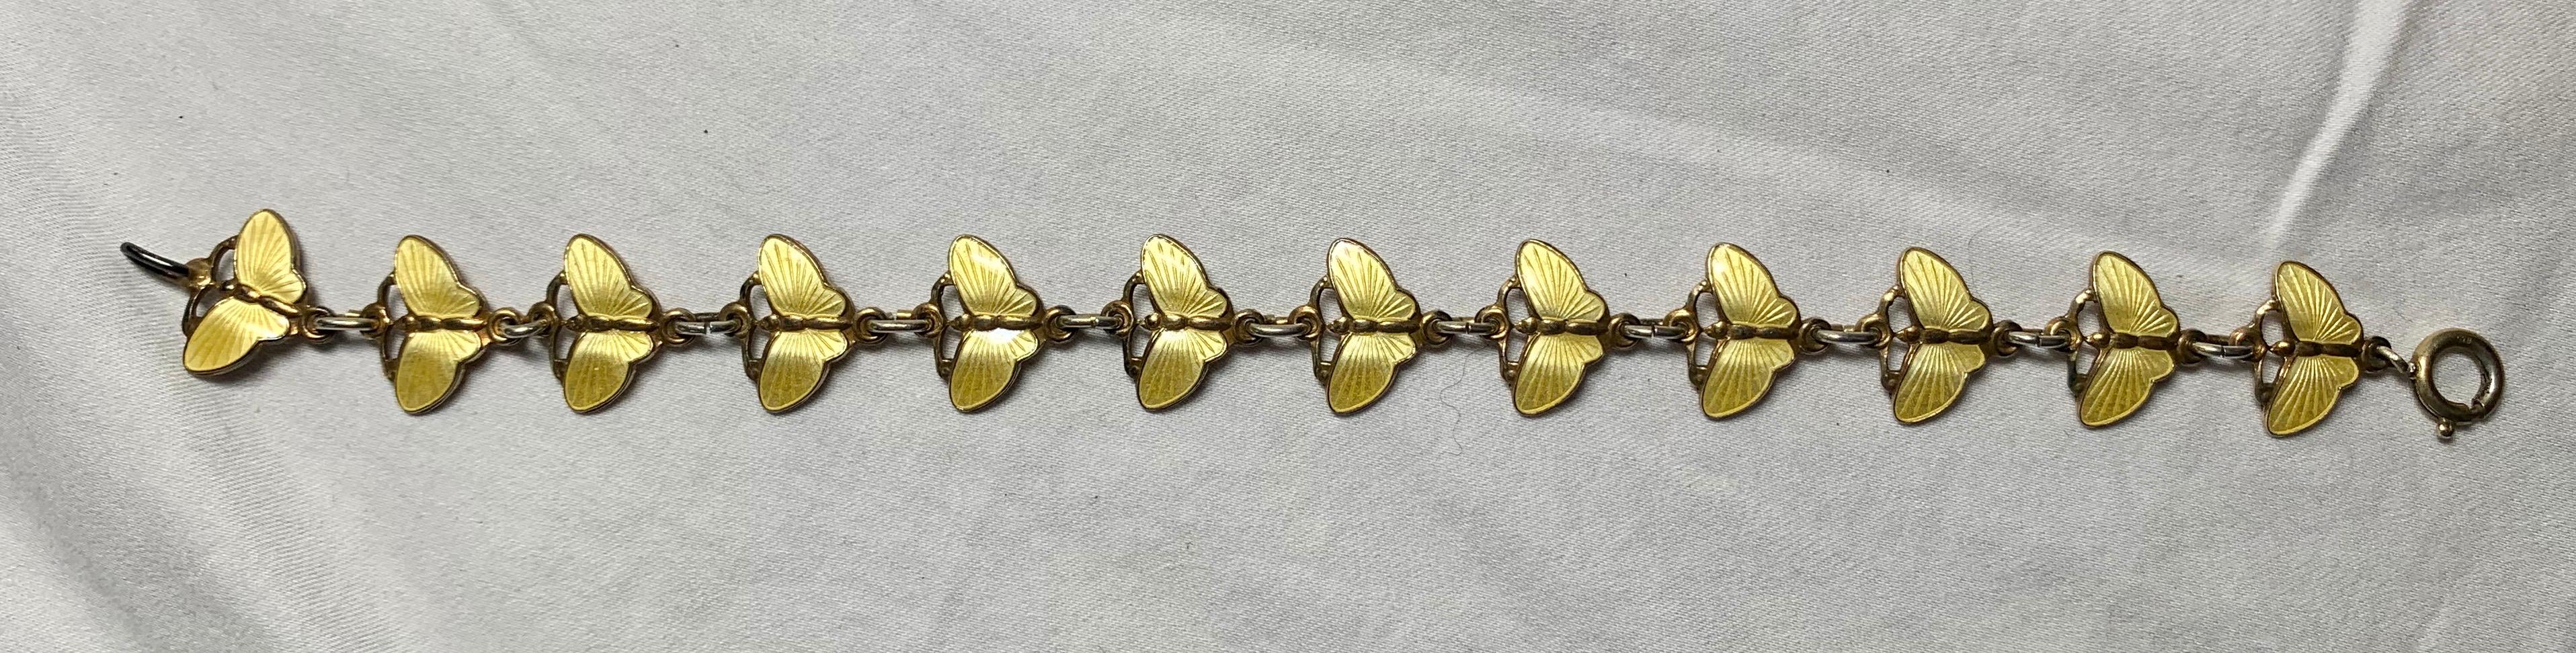 An exquisite Mid-Century Modern Eames Era Yellow Enamel Butterfly Bracelet from Norway in Sterling Silver.  The markers mark may be either Tone Vigeland or Finn Jensen.  The butterflies are in an incredible yellow guilloche enamel design.  This